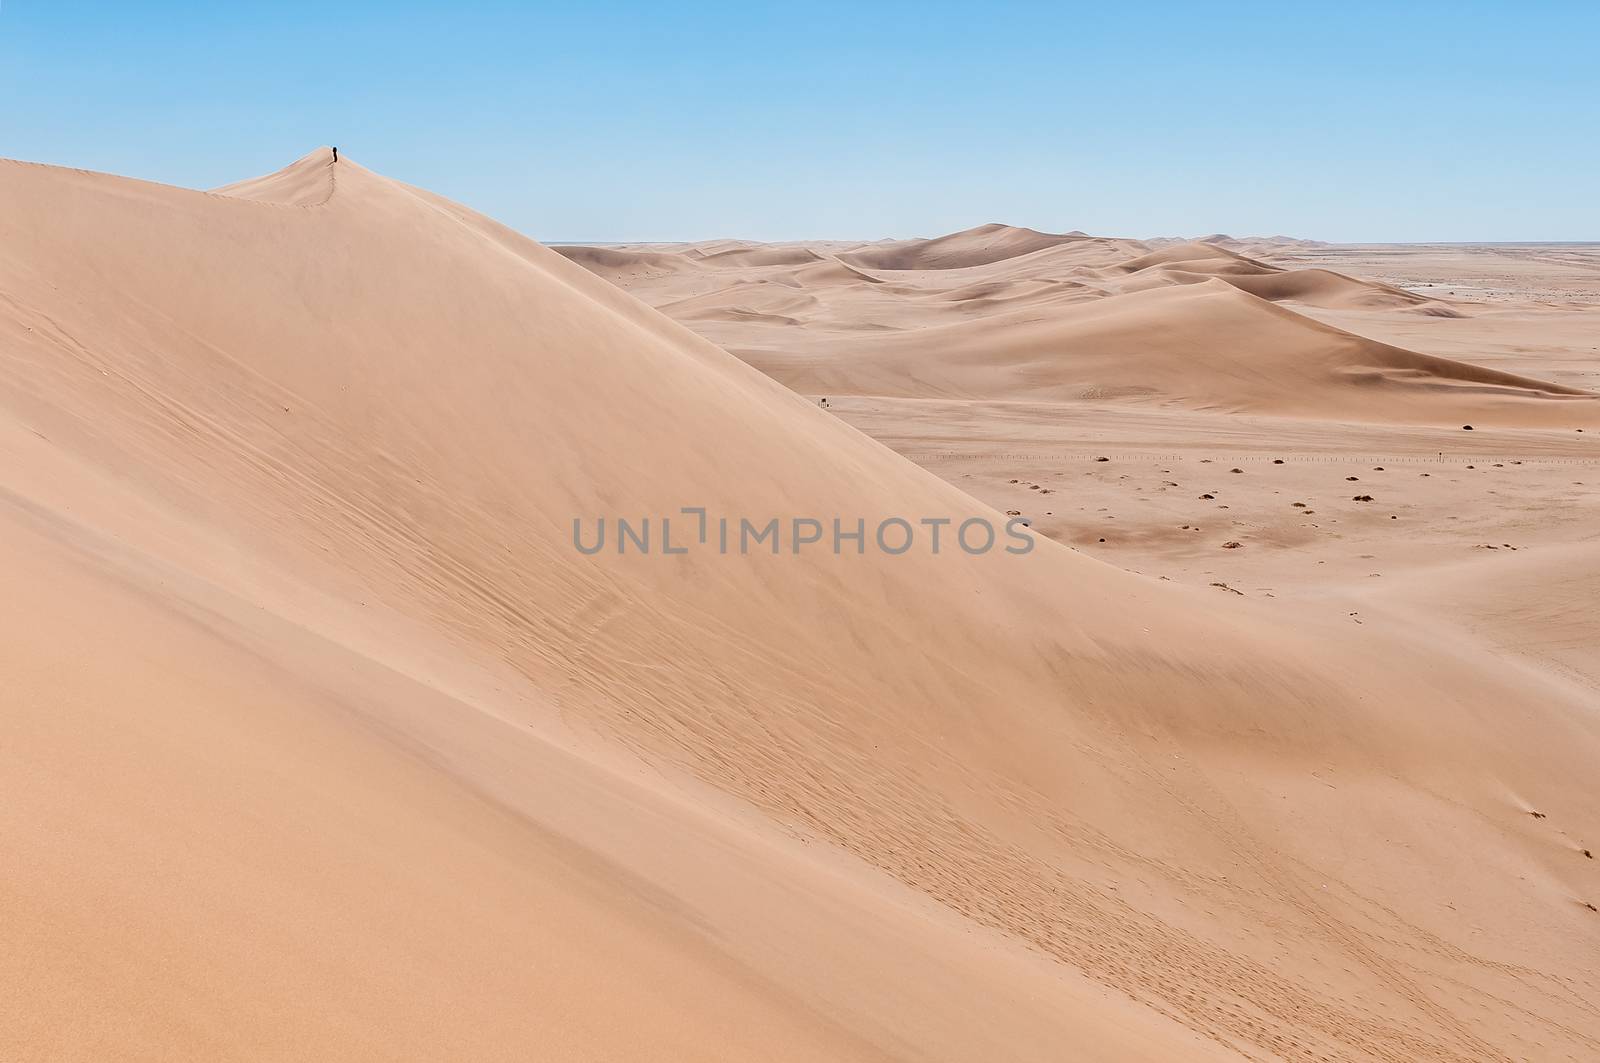 Person is visible on Dune 7 at Walvis Bay by dpreezg